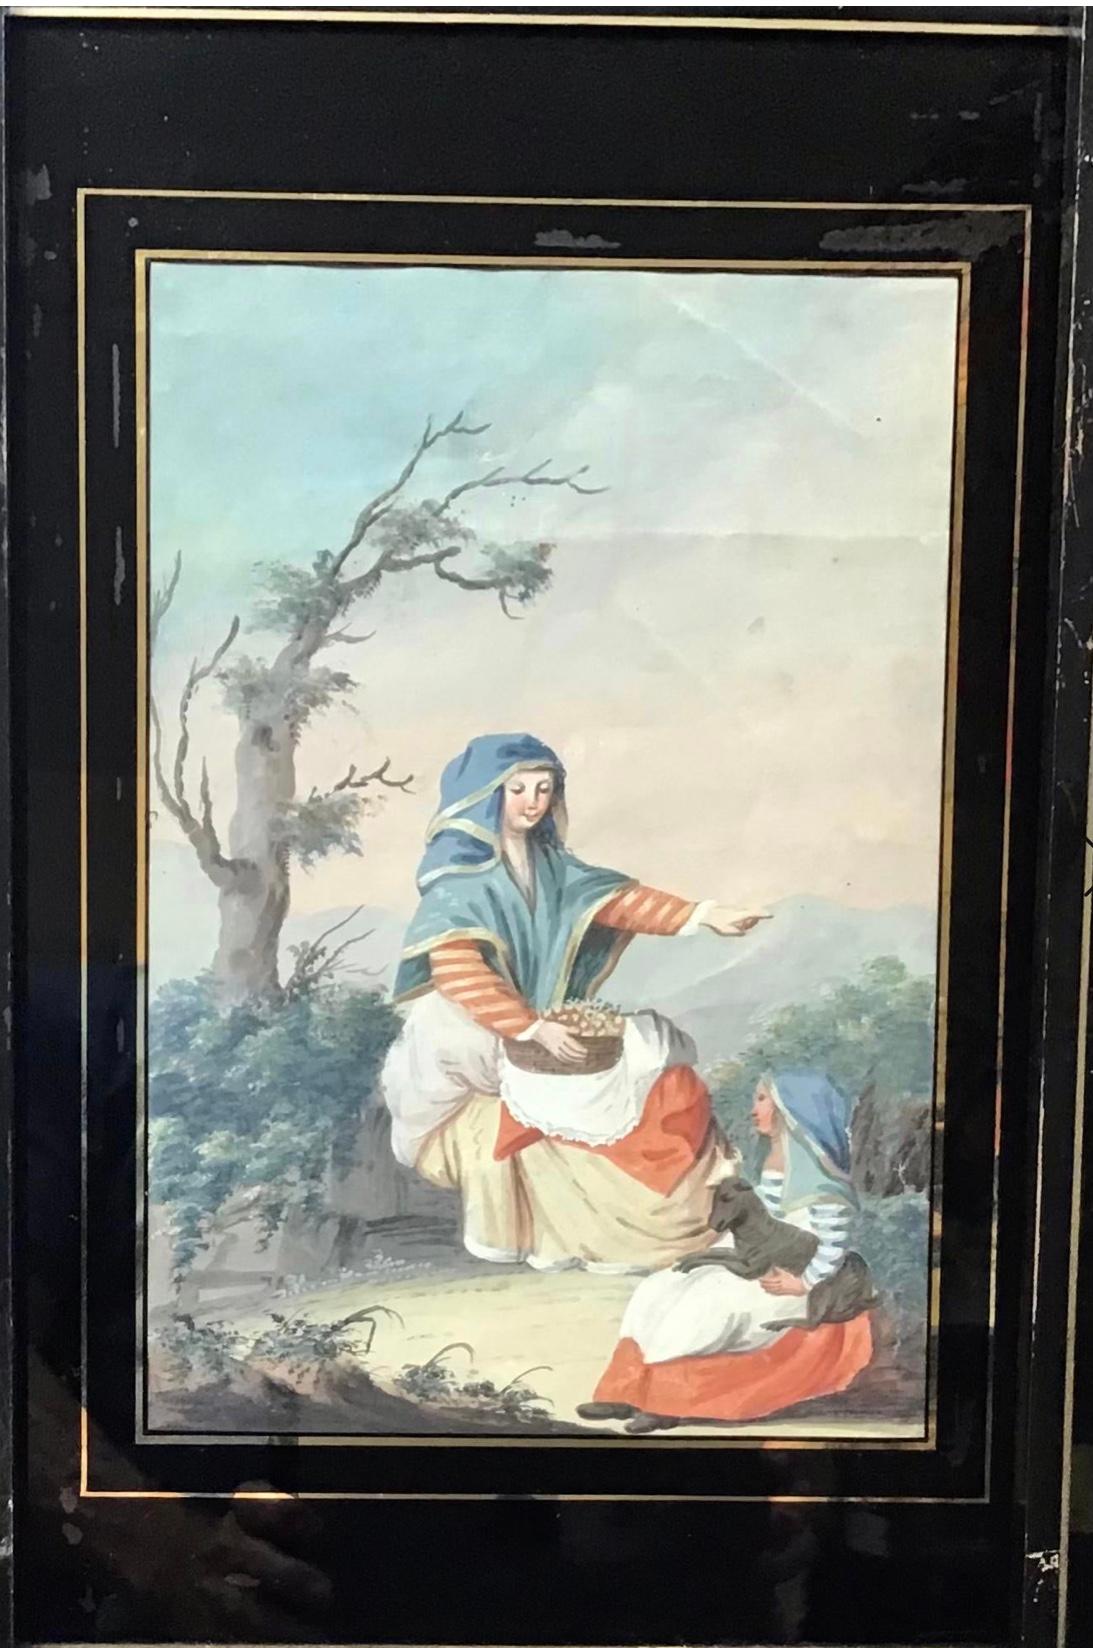 A set of three Neapolitan street scenes. Gouache on paper. Not examined out of the frames. Apparently unsigned. Early 19th century. Possibly by Saverio della Gatta. Label on back from a prominent Boston frame shop. Measures: 11 1/2 ins by 15 ins